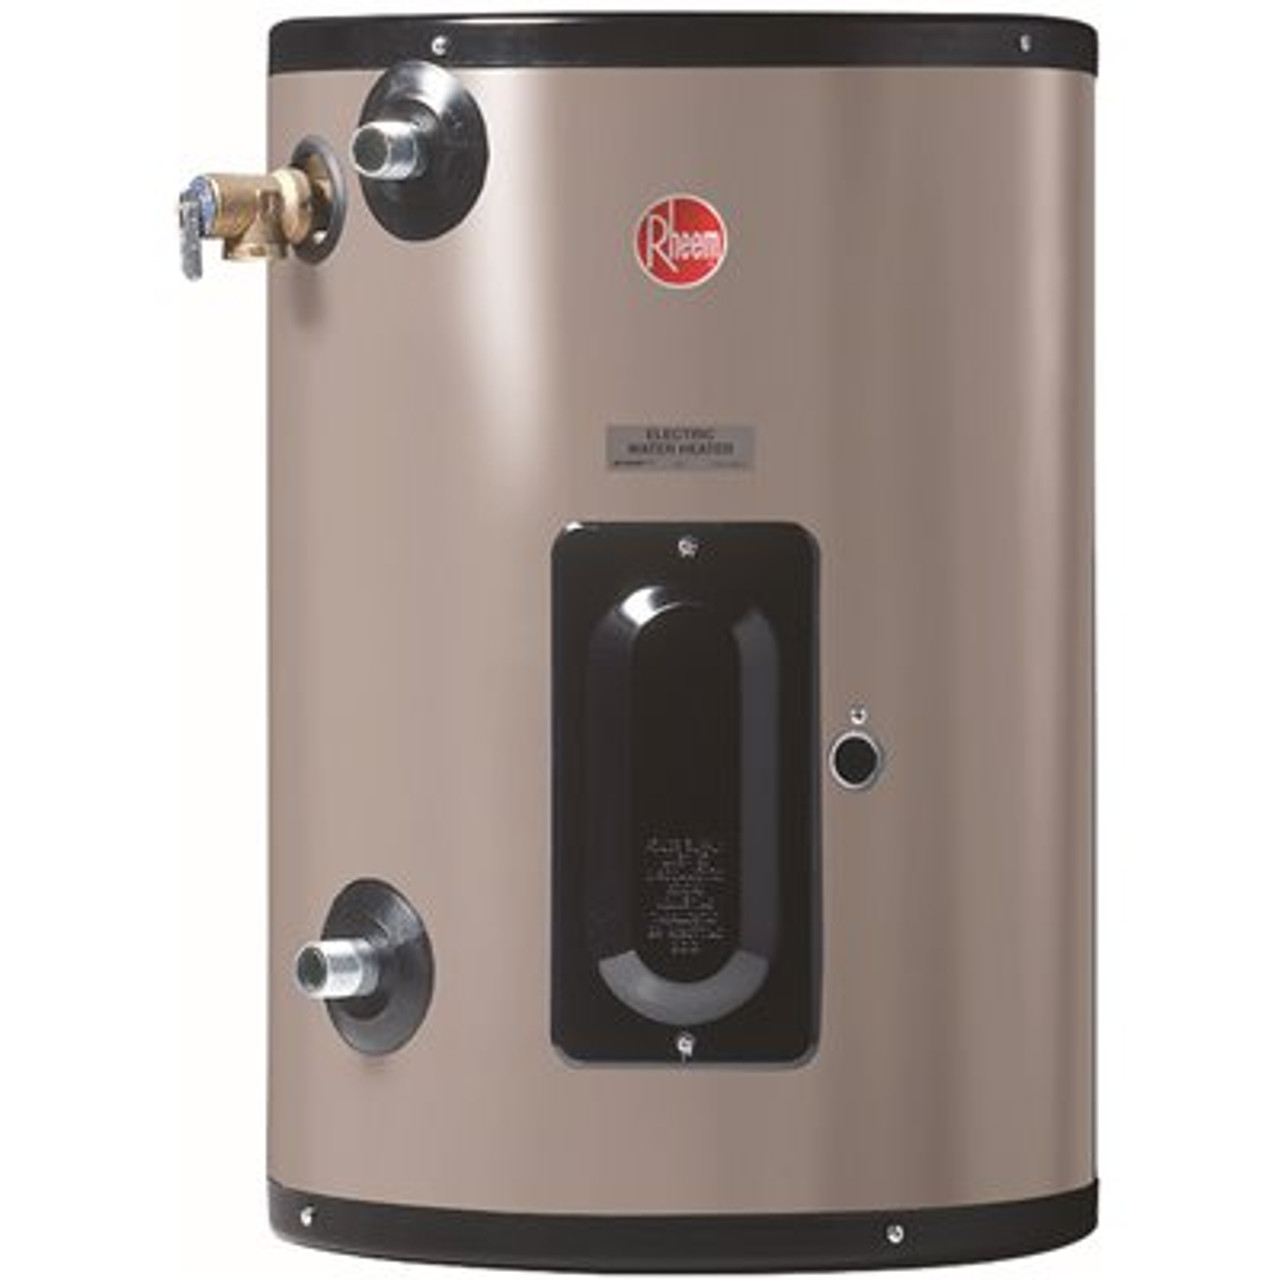 Rheem Commercial Point of Use 6 Gal. 277-Volt 2kw 1 Phase Electric Tank Water Heater